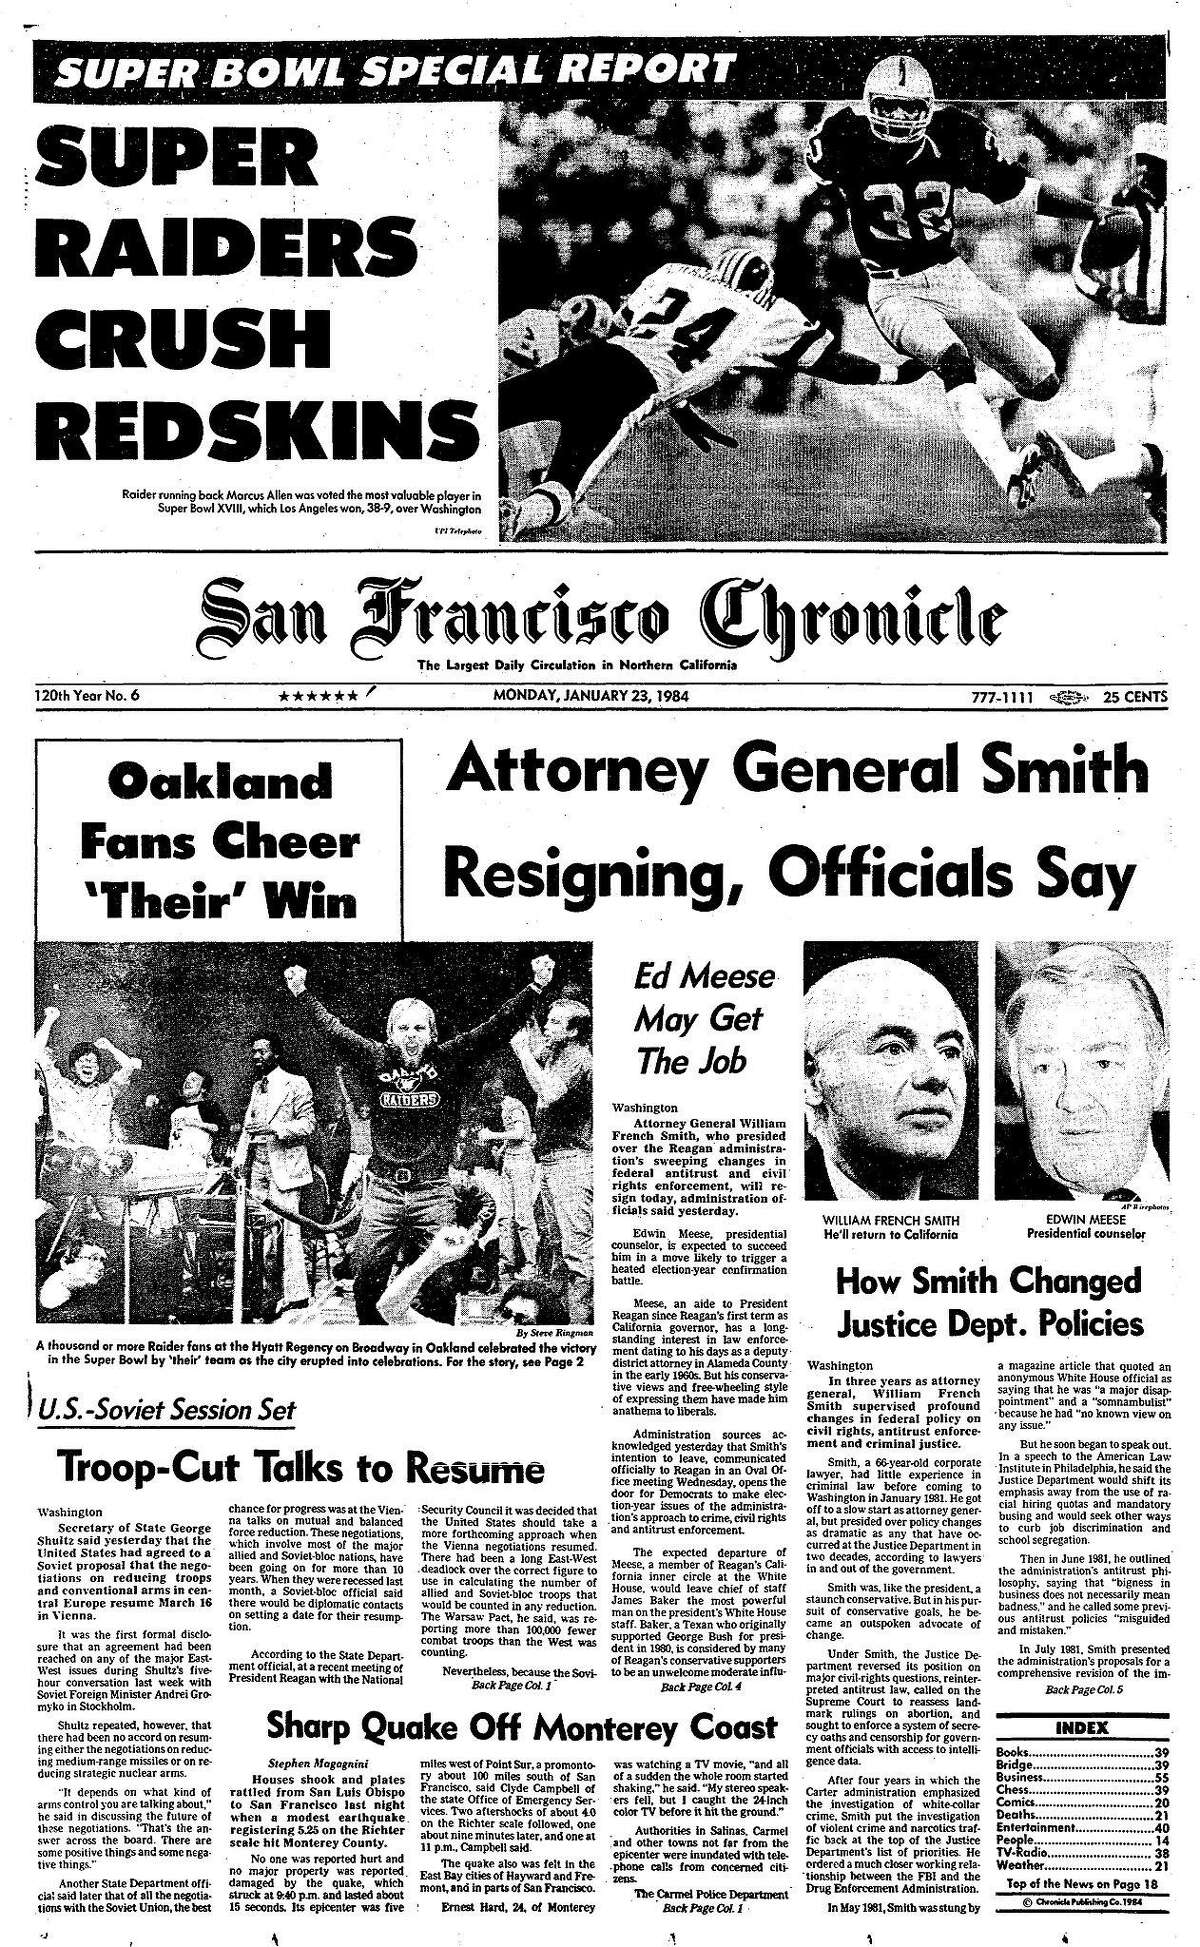 Chronicle Covers: Raiders won the Super Bowl, but Oakland didn't